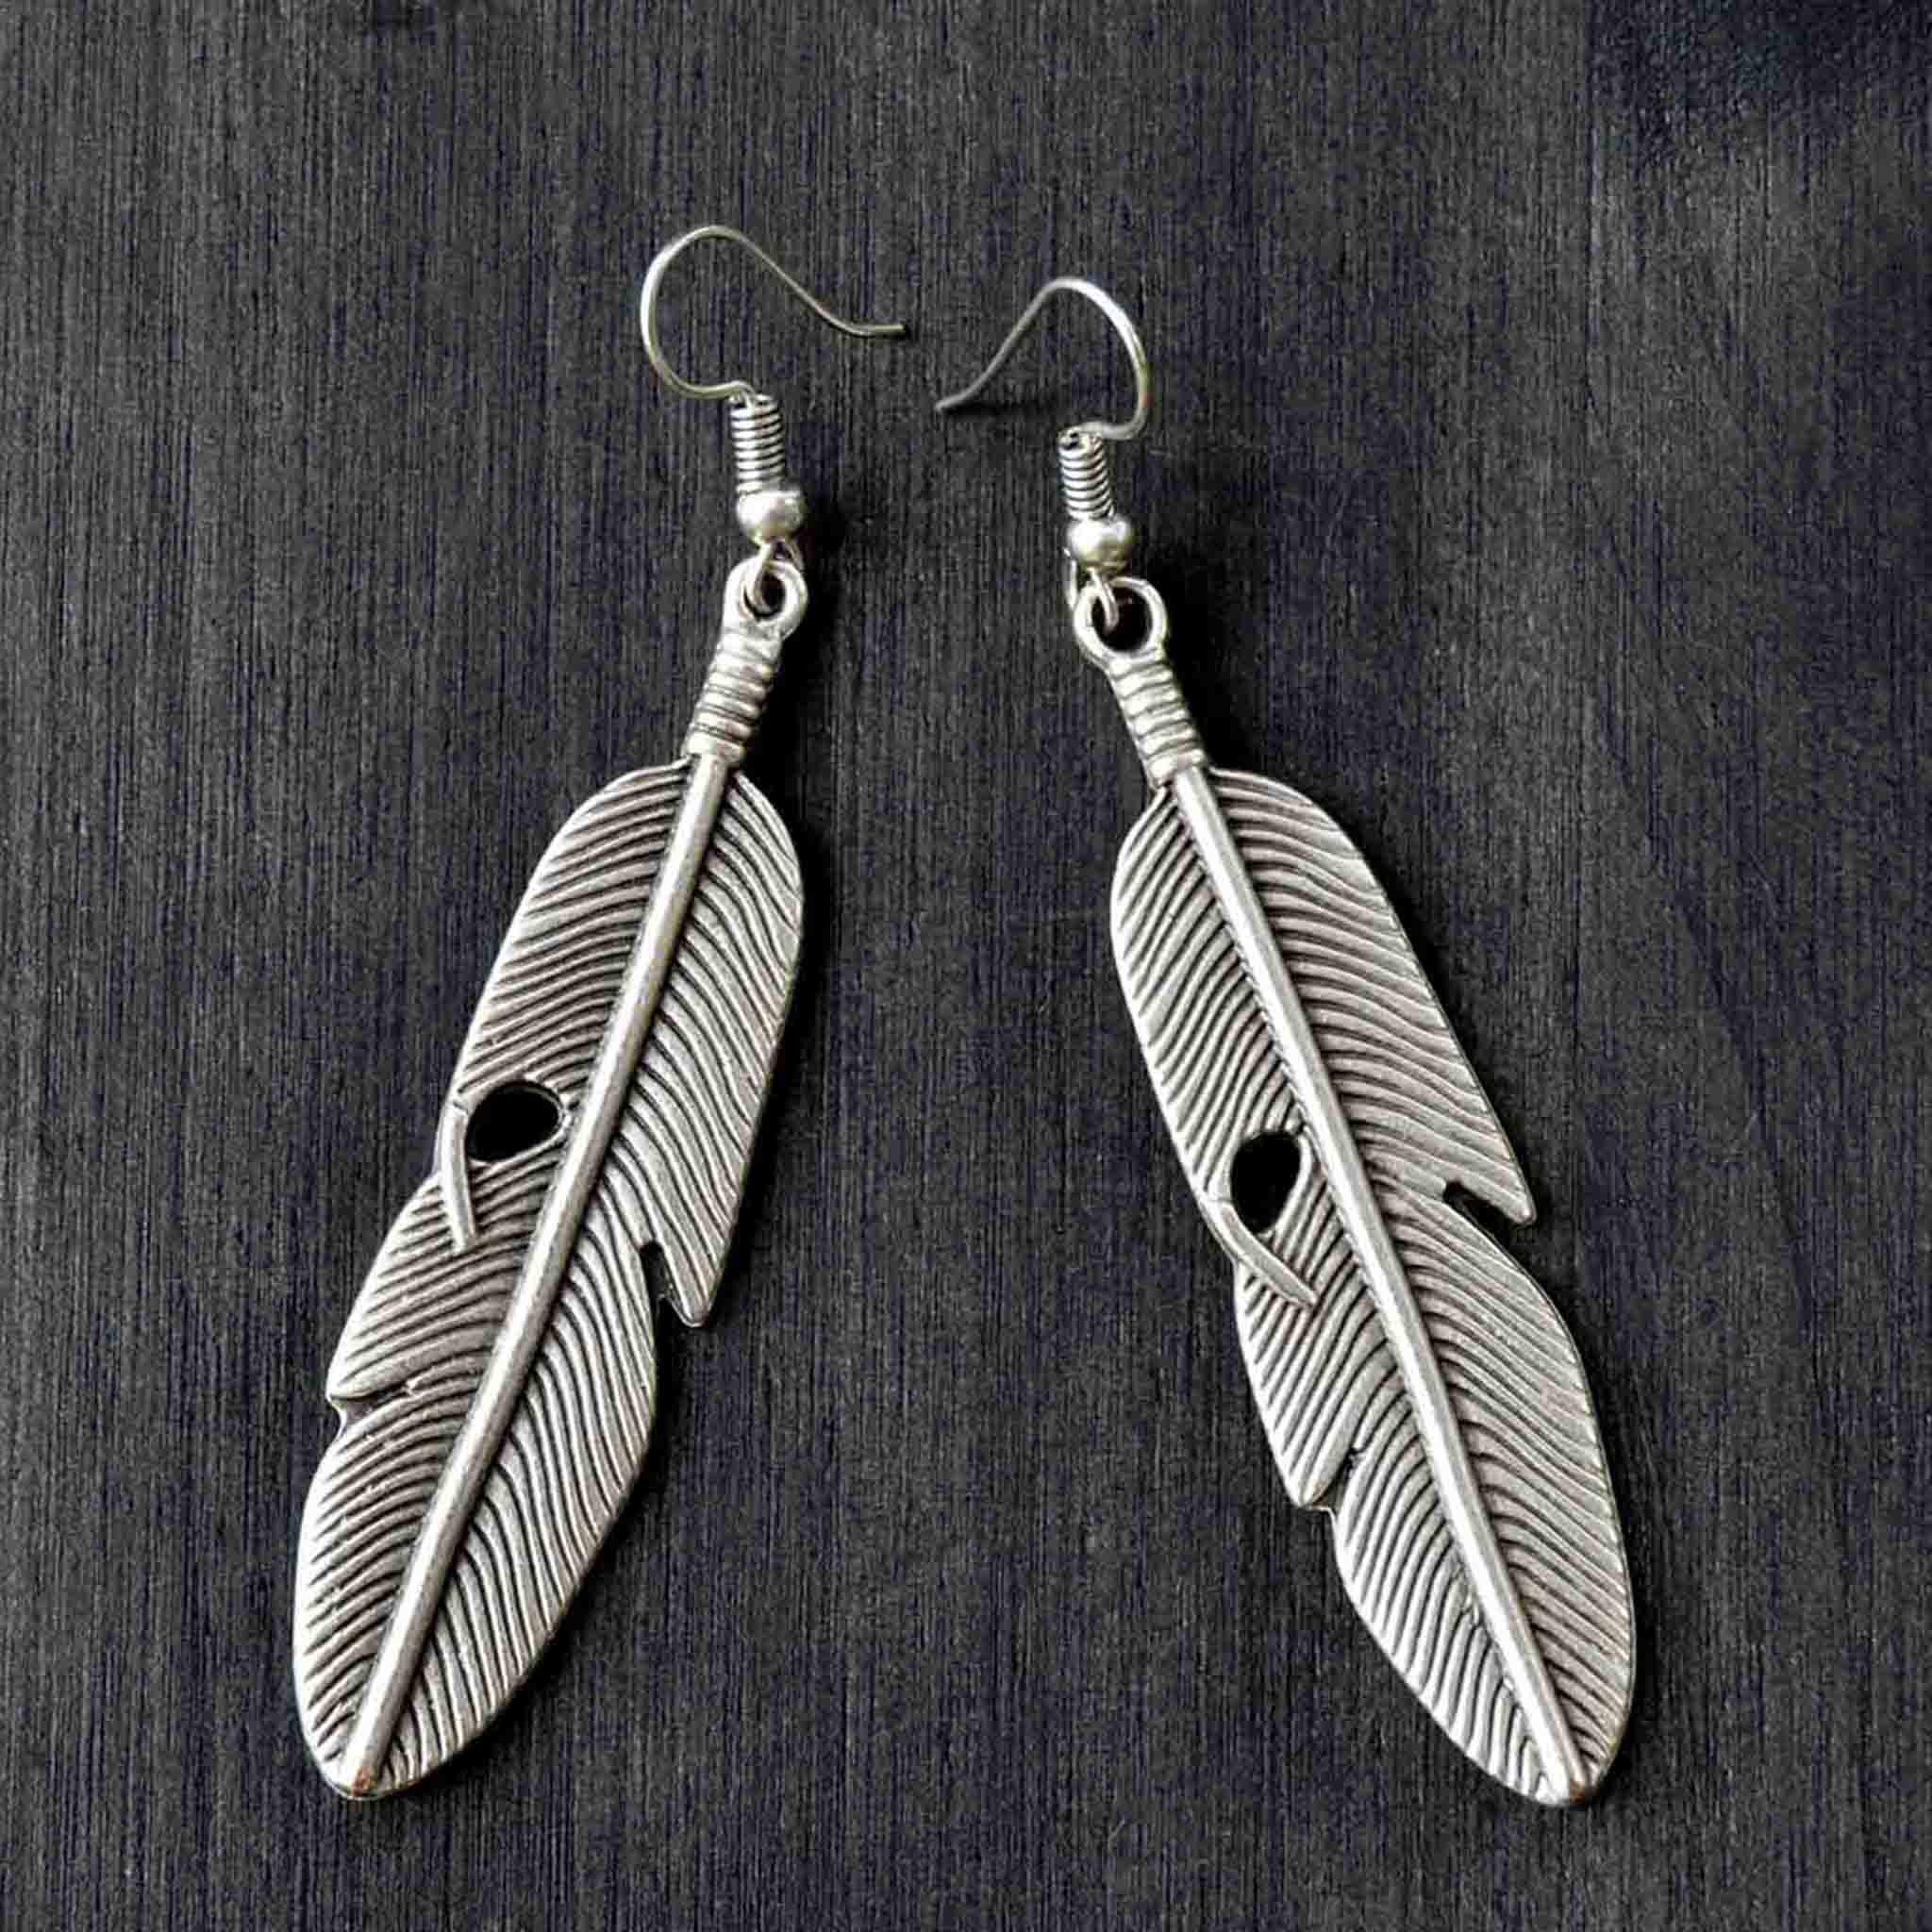 Long silver feather dangly earrings on gray background